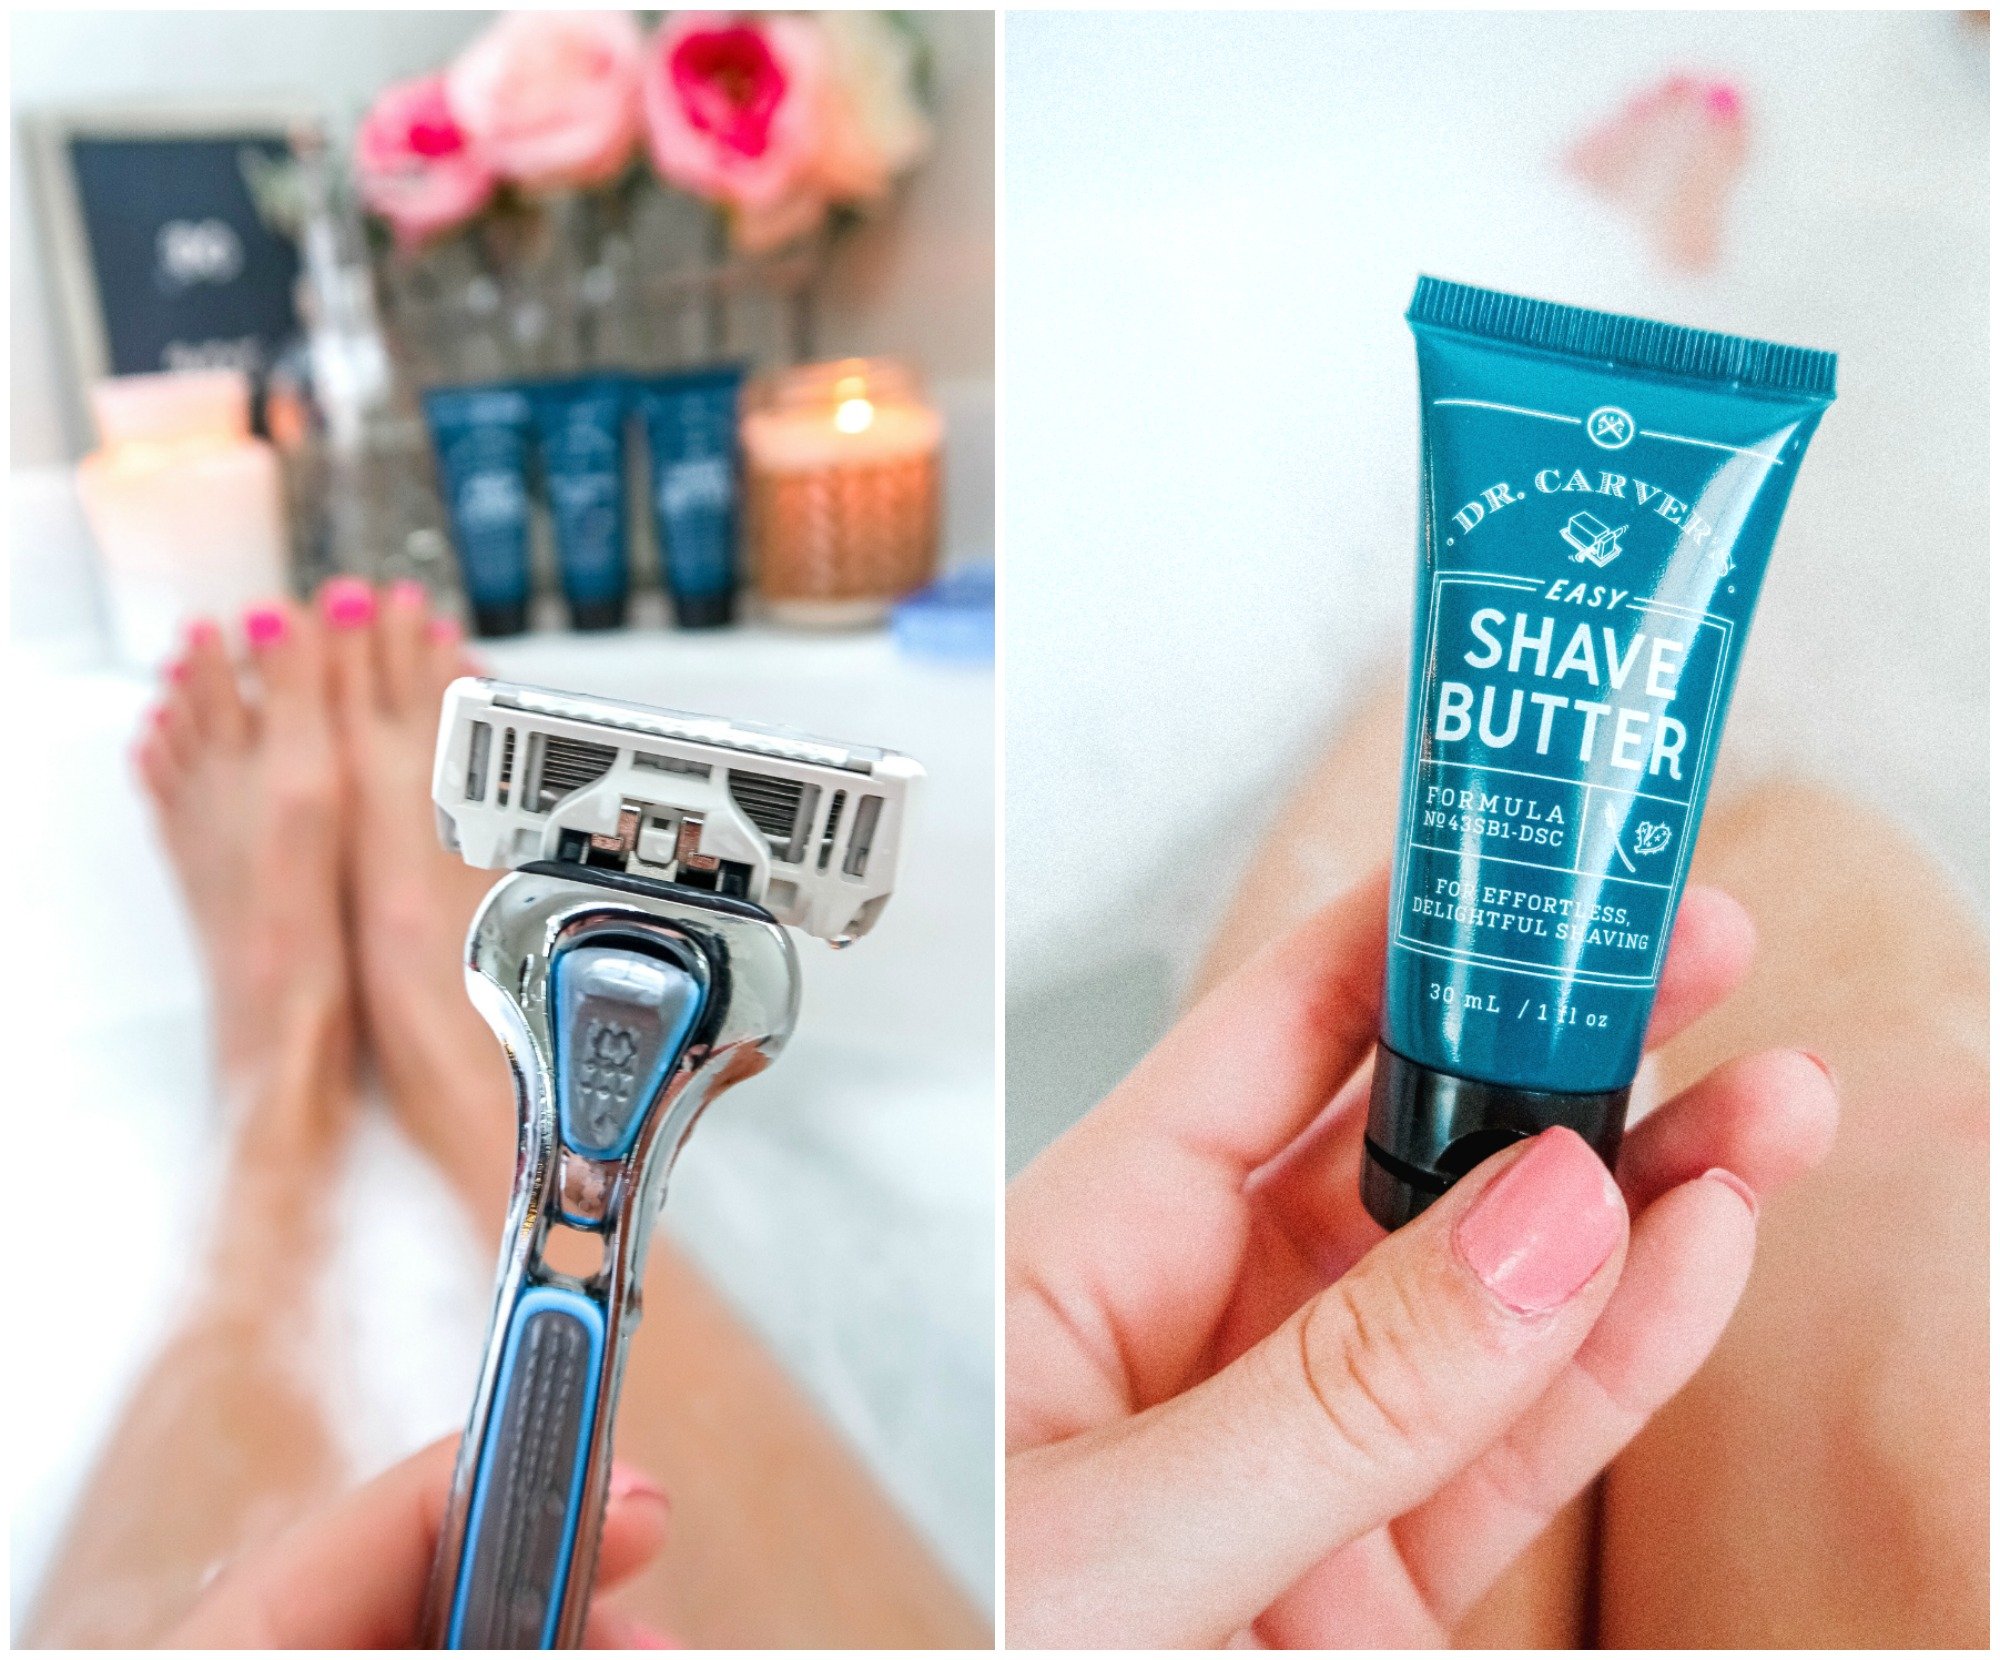 dollar shave club, shaving cream, products, shave butter, post shave, shaving your legs, self care, routine, lifestyle, bath, 